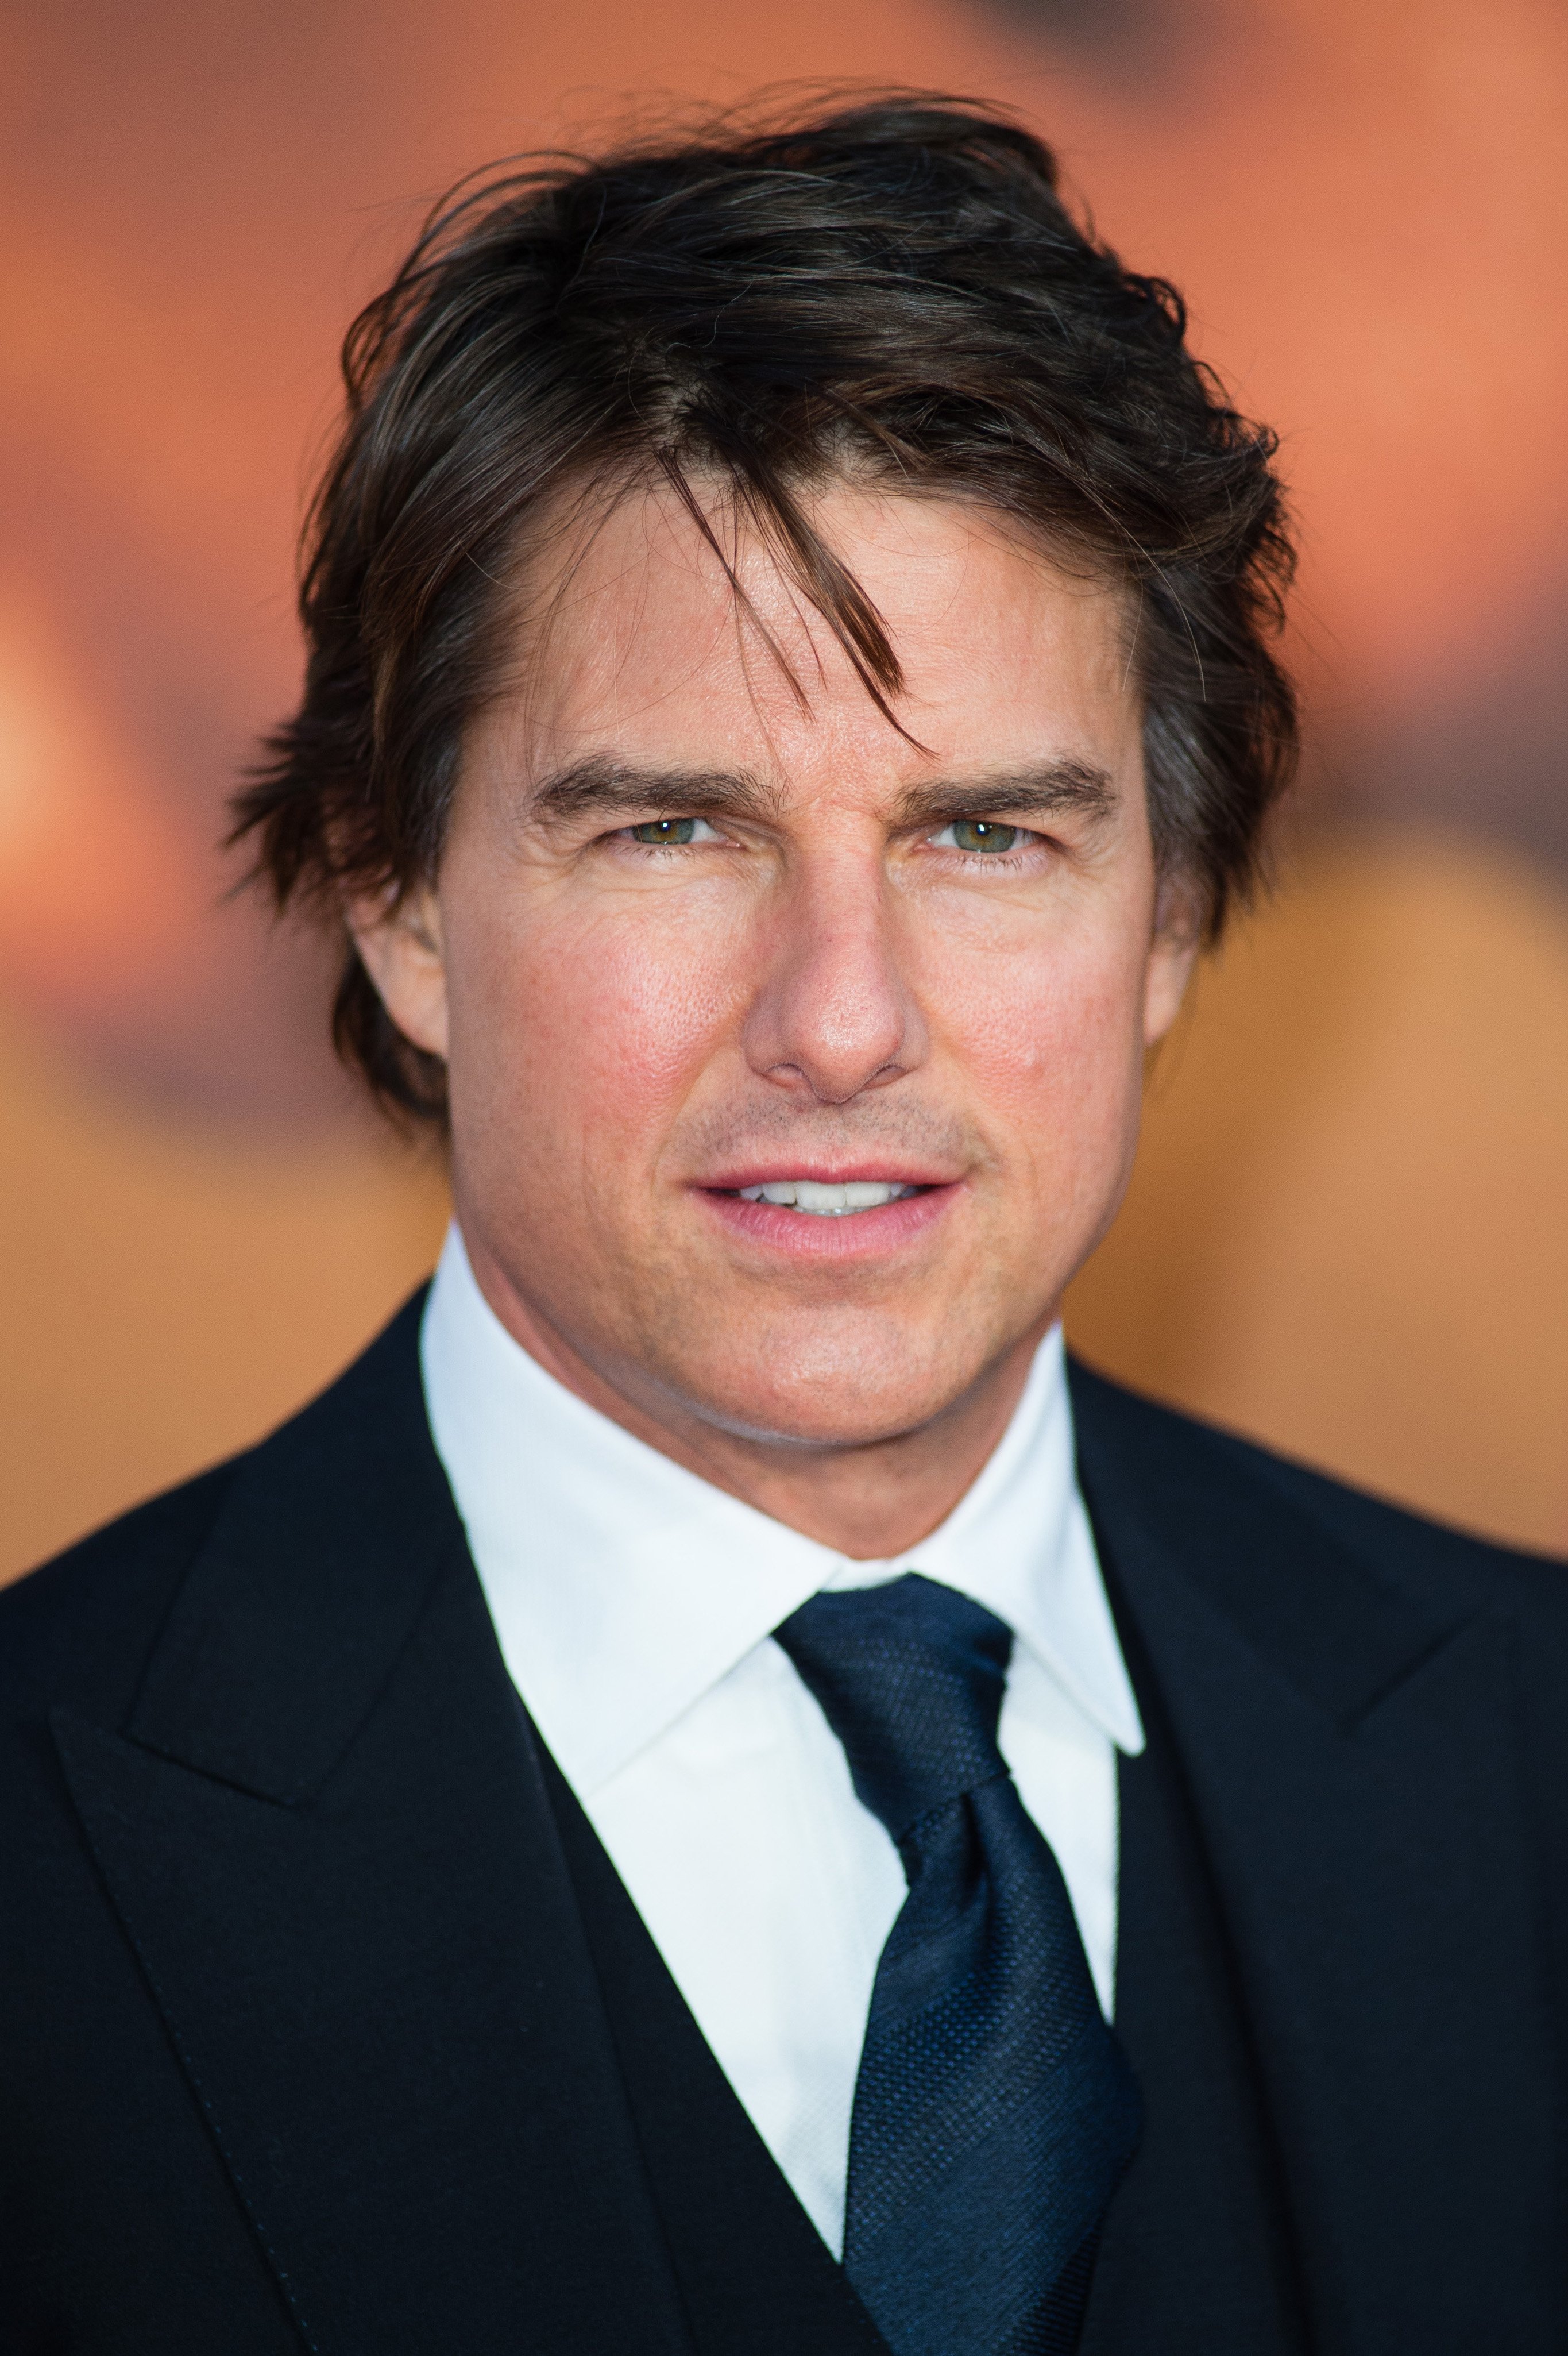 Tom Cruise at the European premiere of "Jack Reacher: Never Go Back" on October 20, 2016, in London | Source: Getty Images